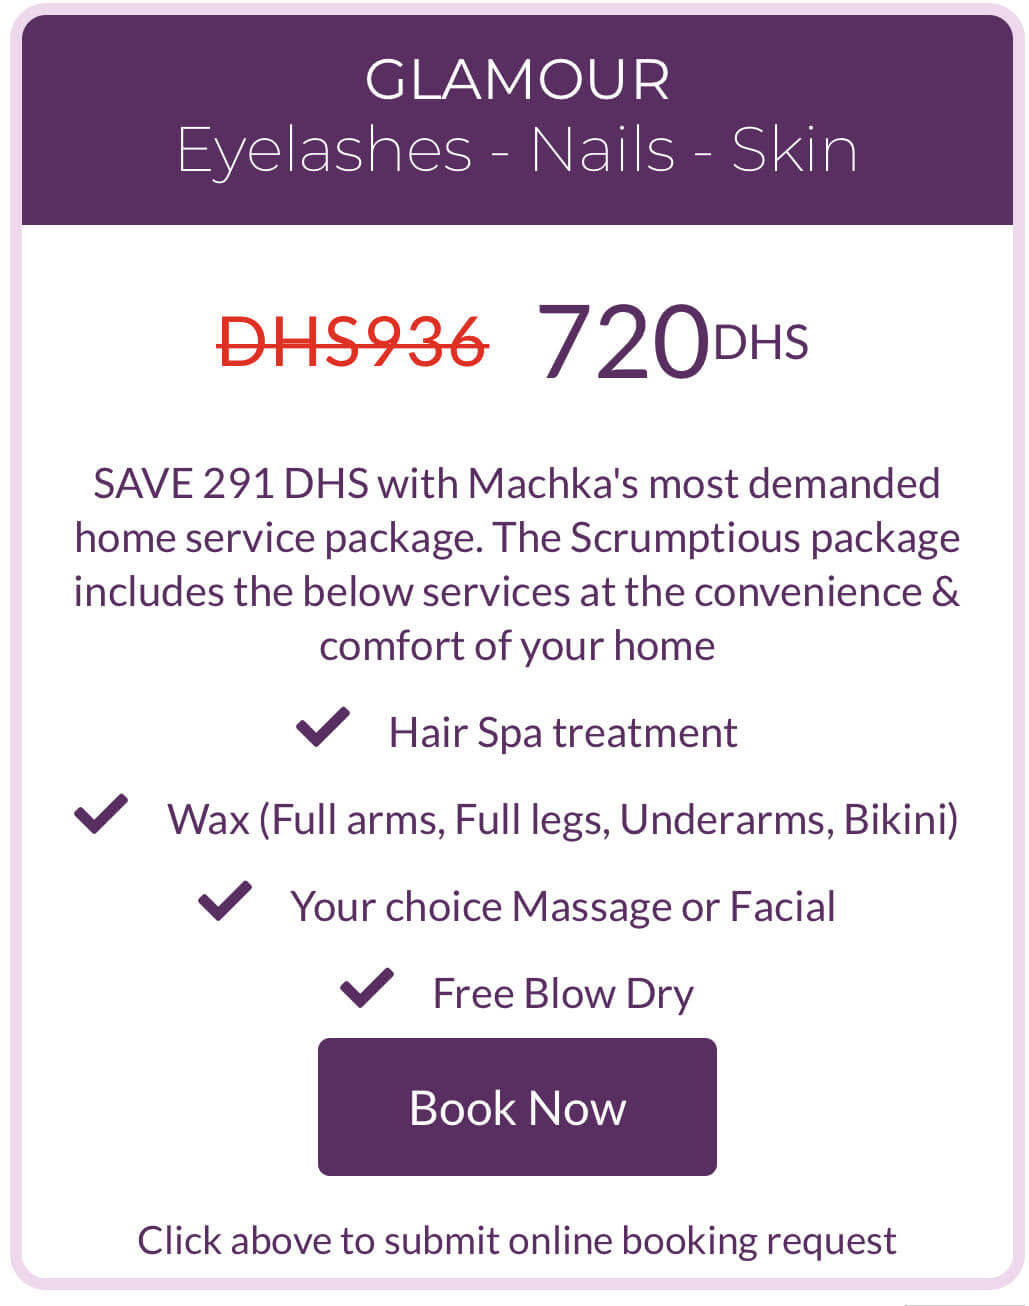 Dubai Machka Beauty & fitness services at home - Hair Salon services - Home services hair colour keratin extensions Brazilian blowout nails massage slimming personal training fitness and more - Package offer 1